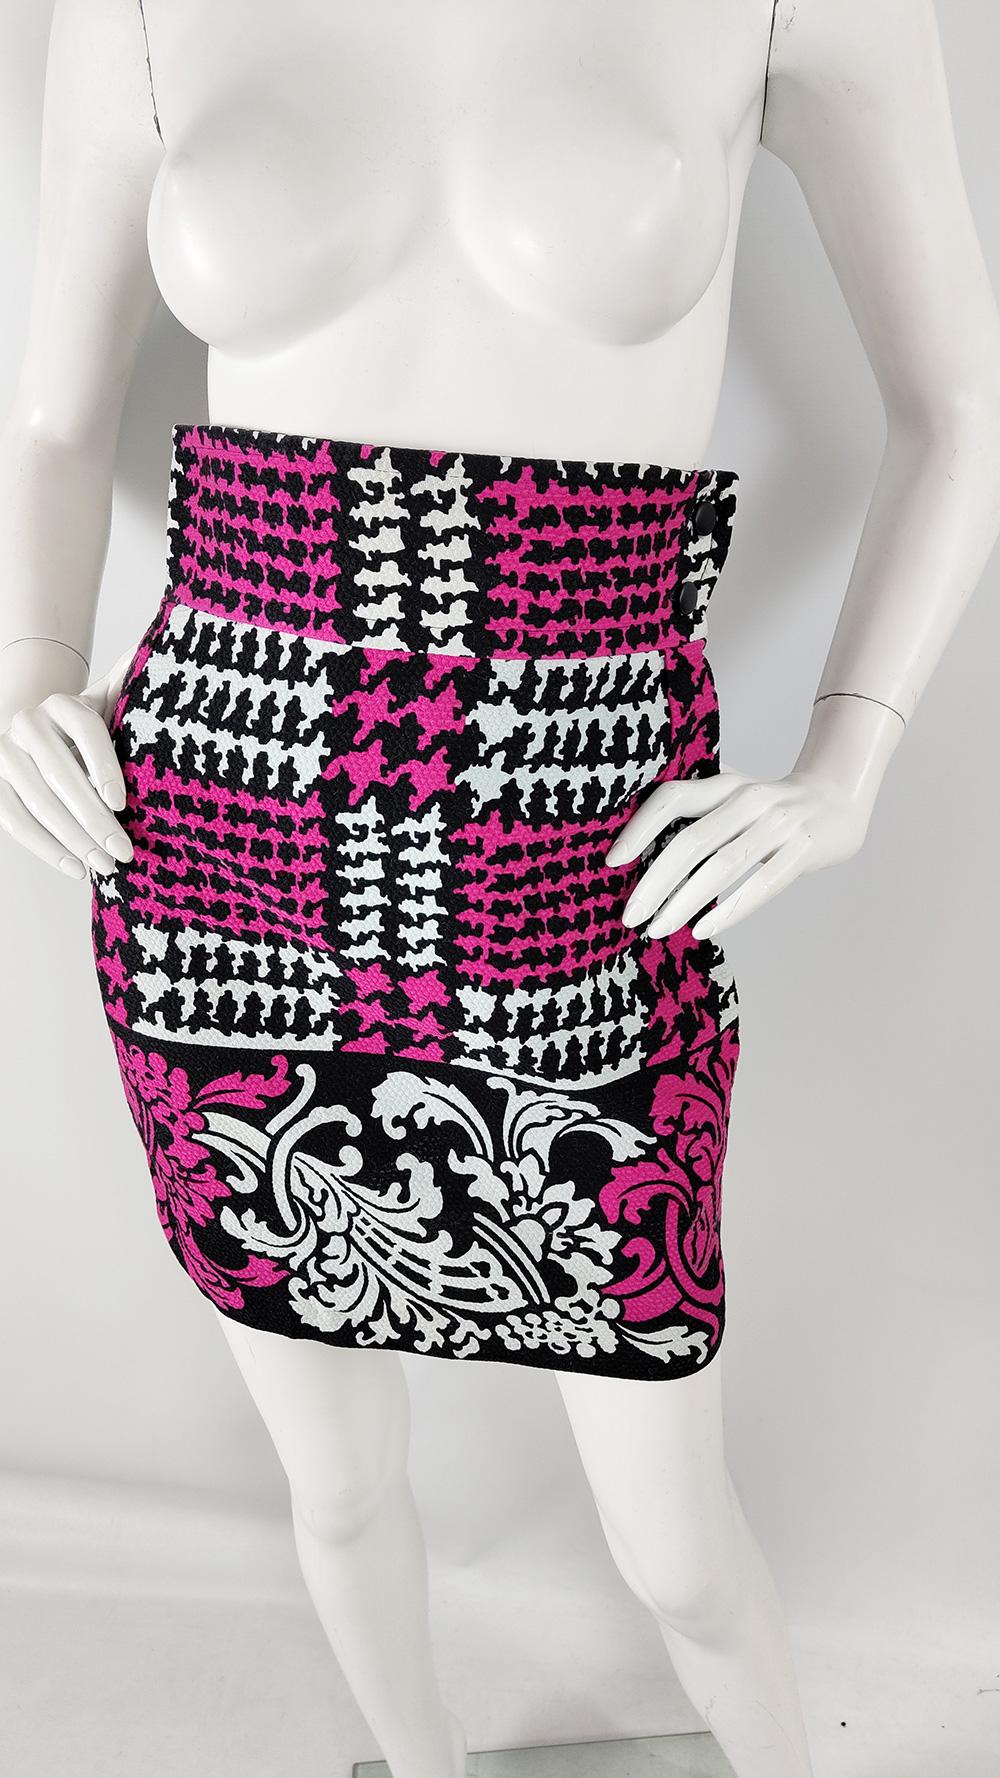 Christian Lacroix Vintage 90s Textured Cotton Houndstooth High Waist Mini Skirt In Excellent Condition For Sale In Doncaster, South Yorkshire